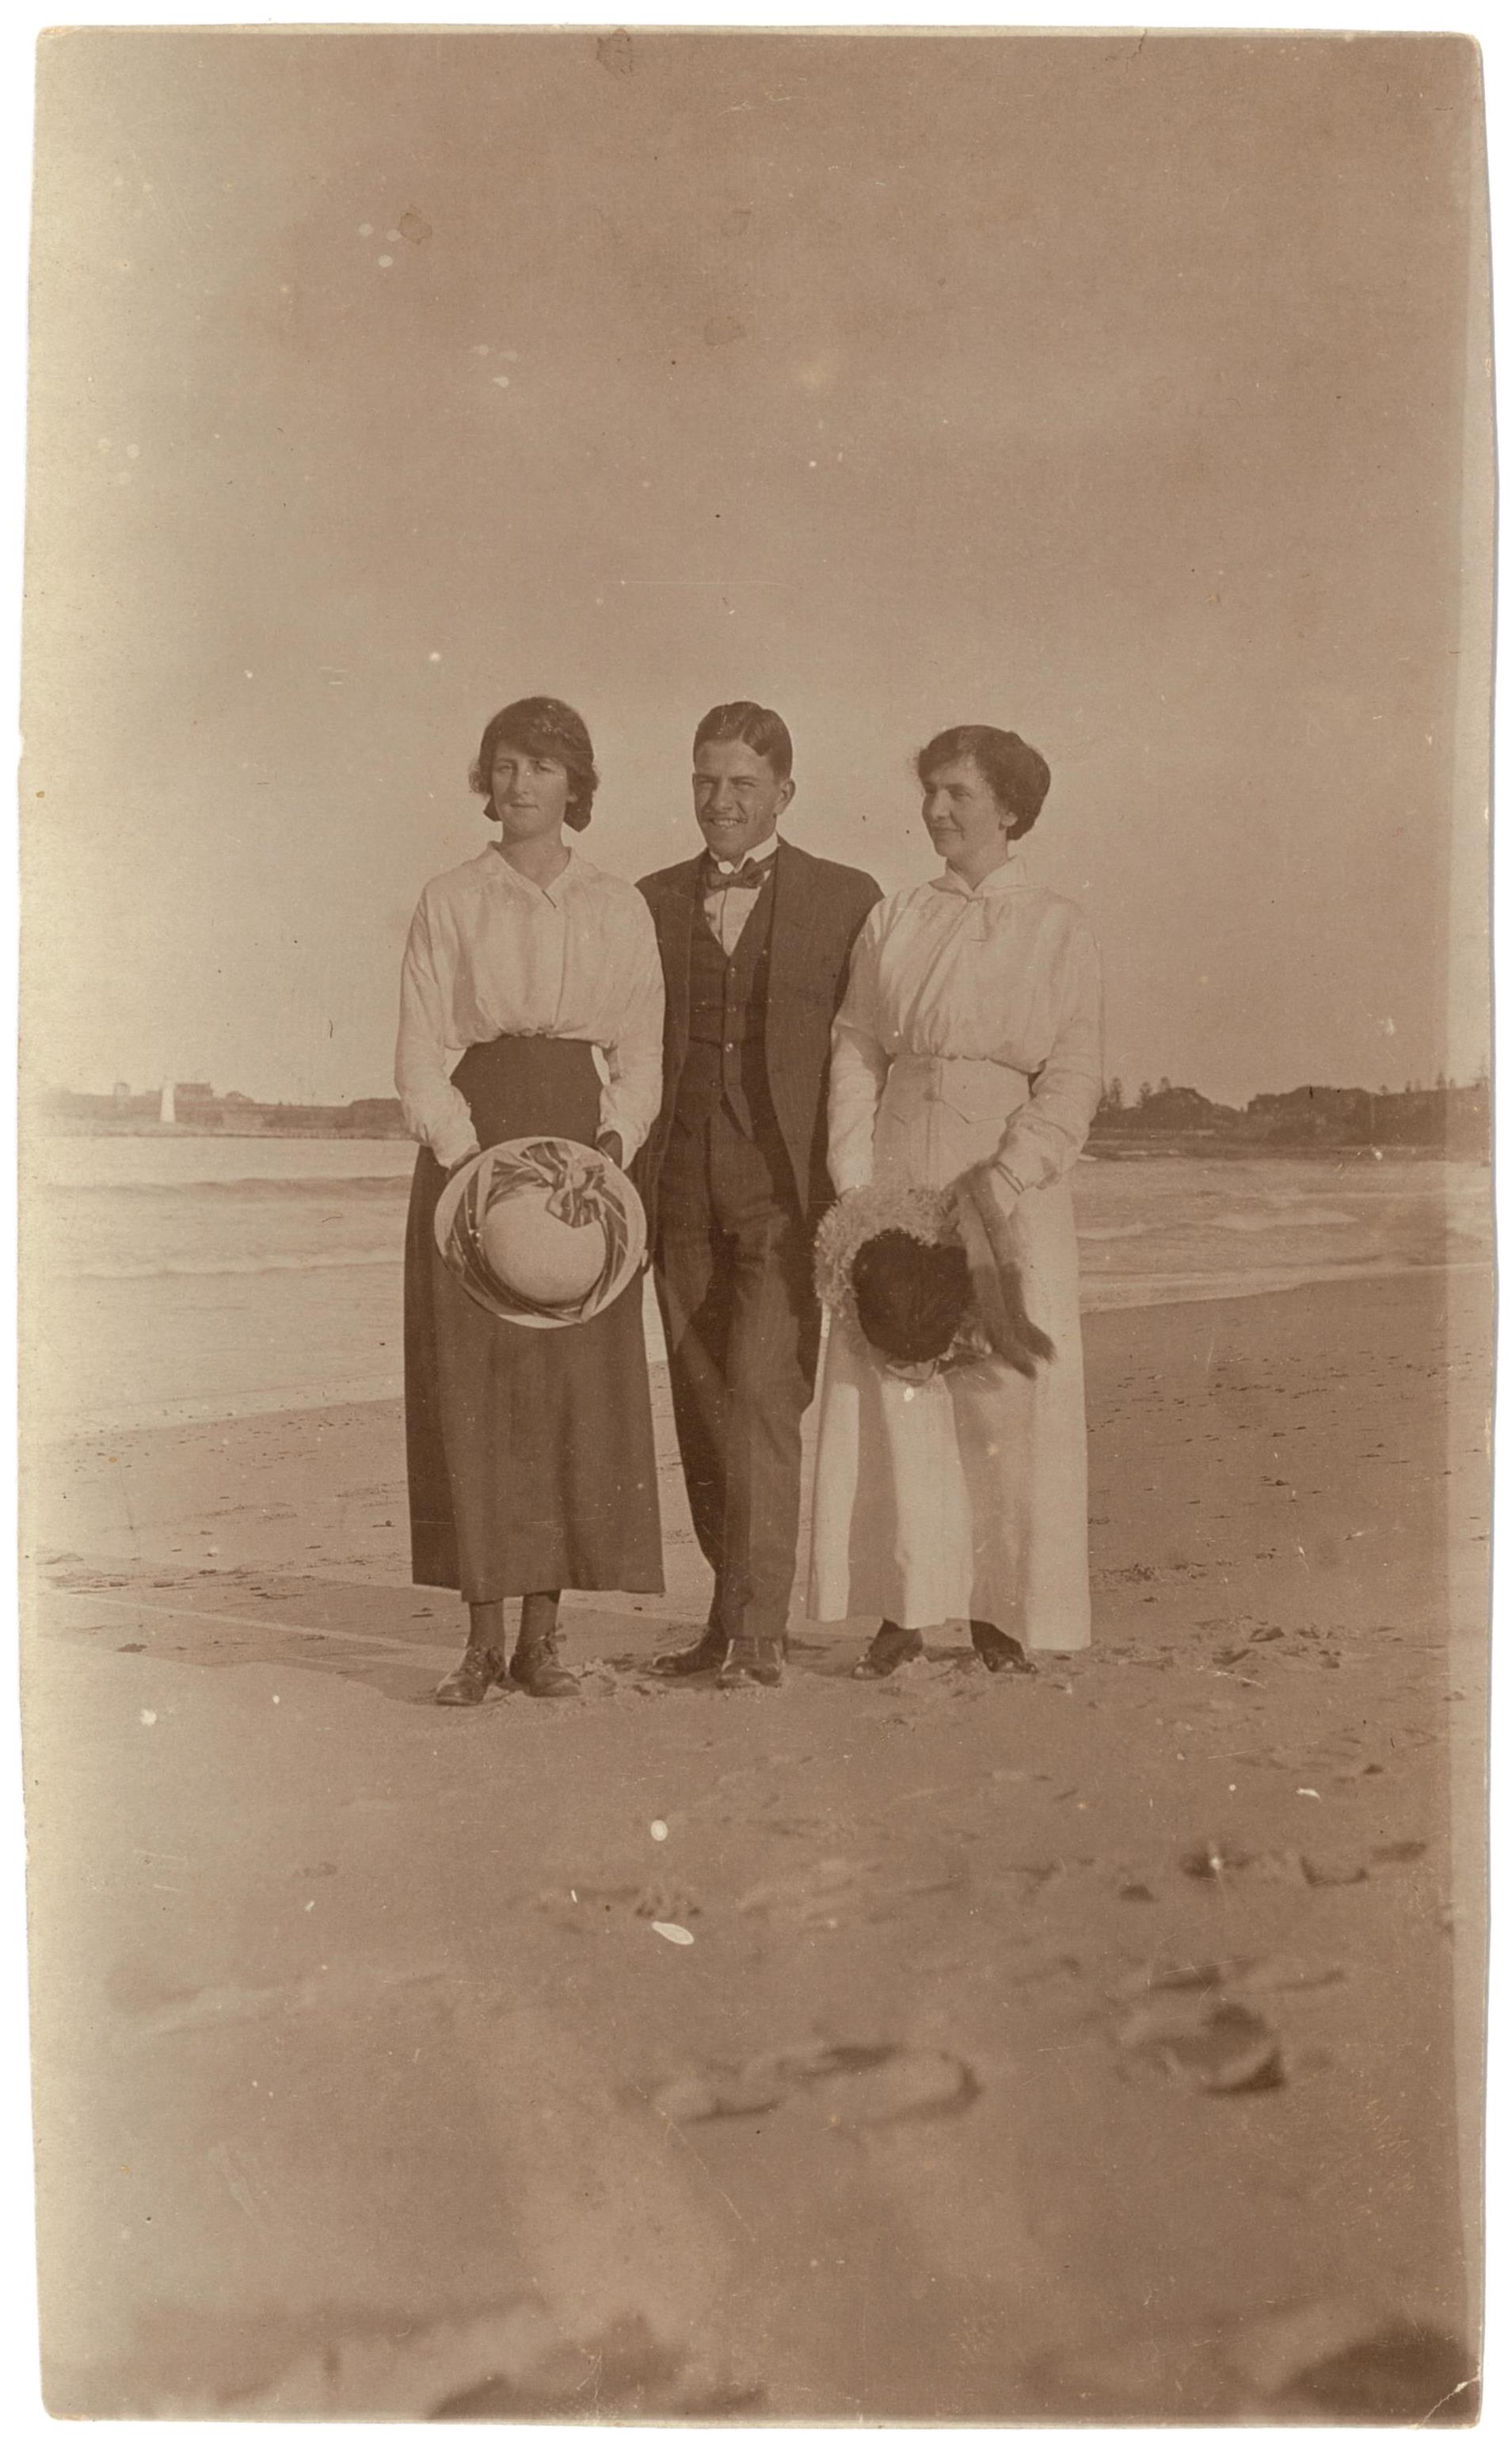 Bob Barnet with Erica Nicolle and his aunt Nellie Macgregor on the beach at Wollongong, around 1914 / Robert Barnet